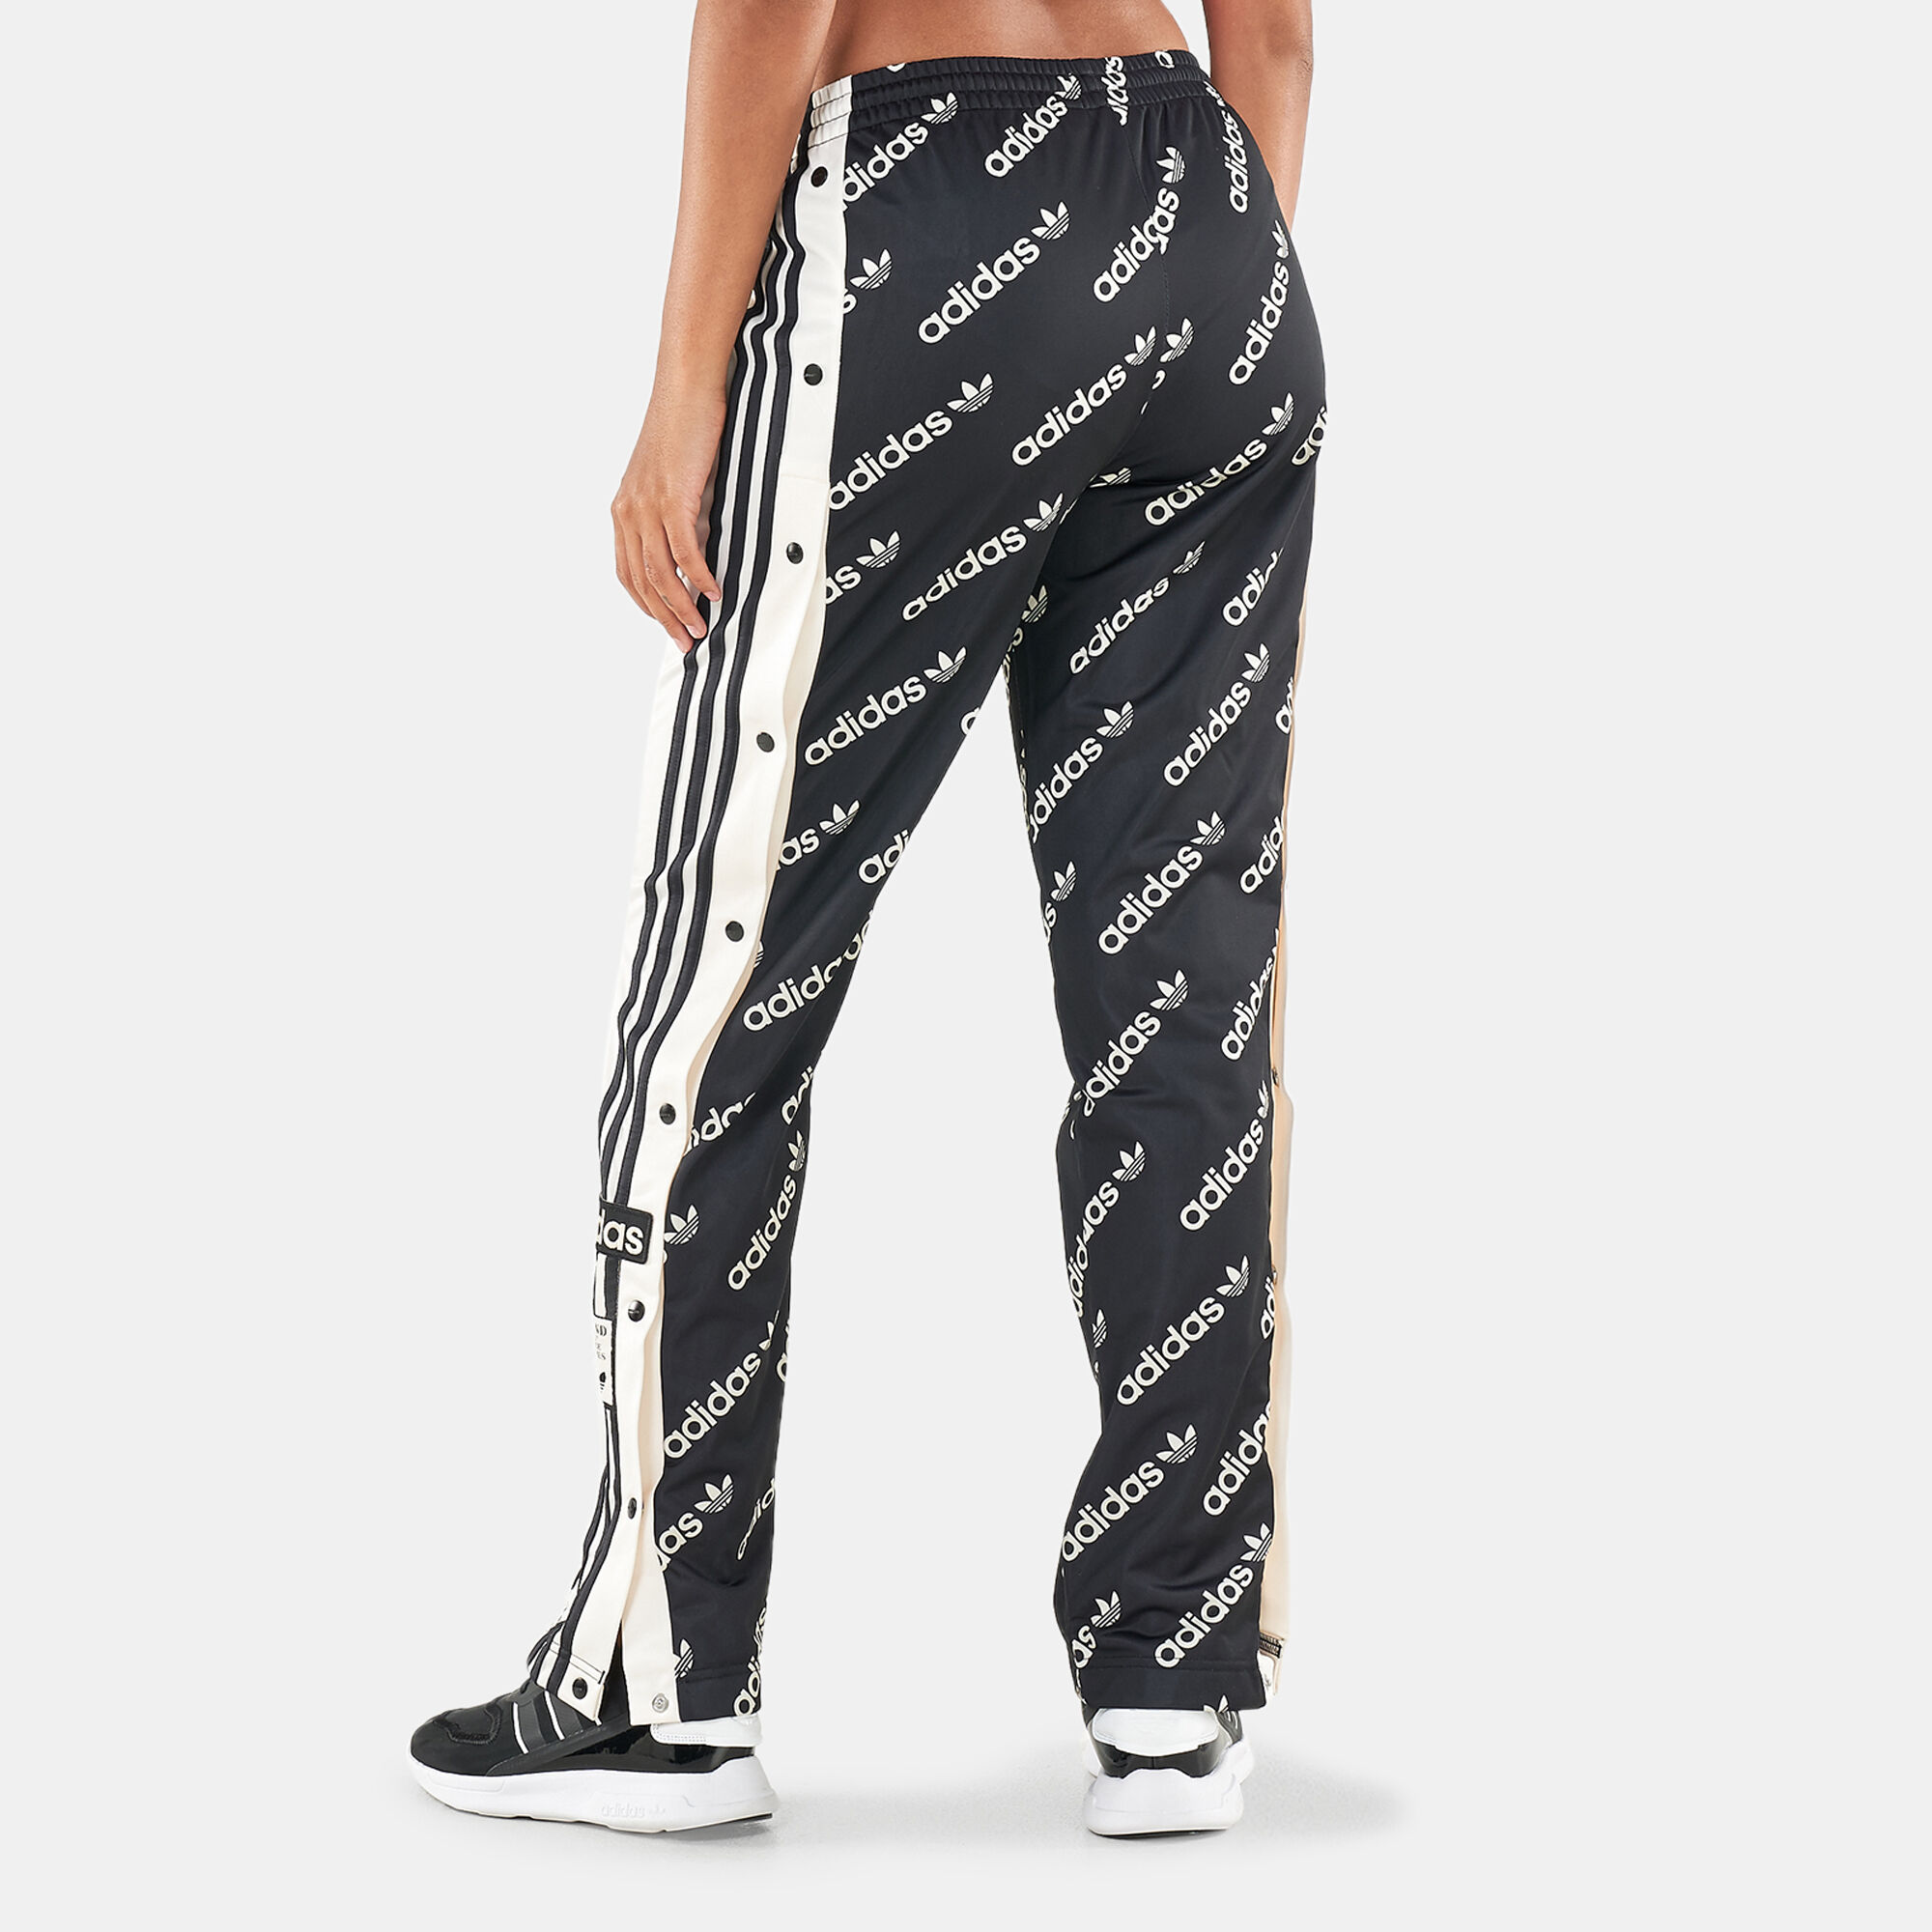 Look Poppin' in this season's hottest trend: Popper Pants | JD Women